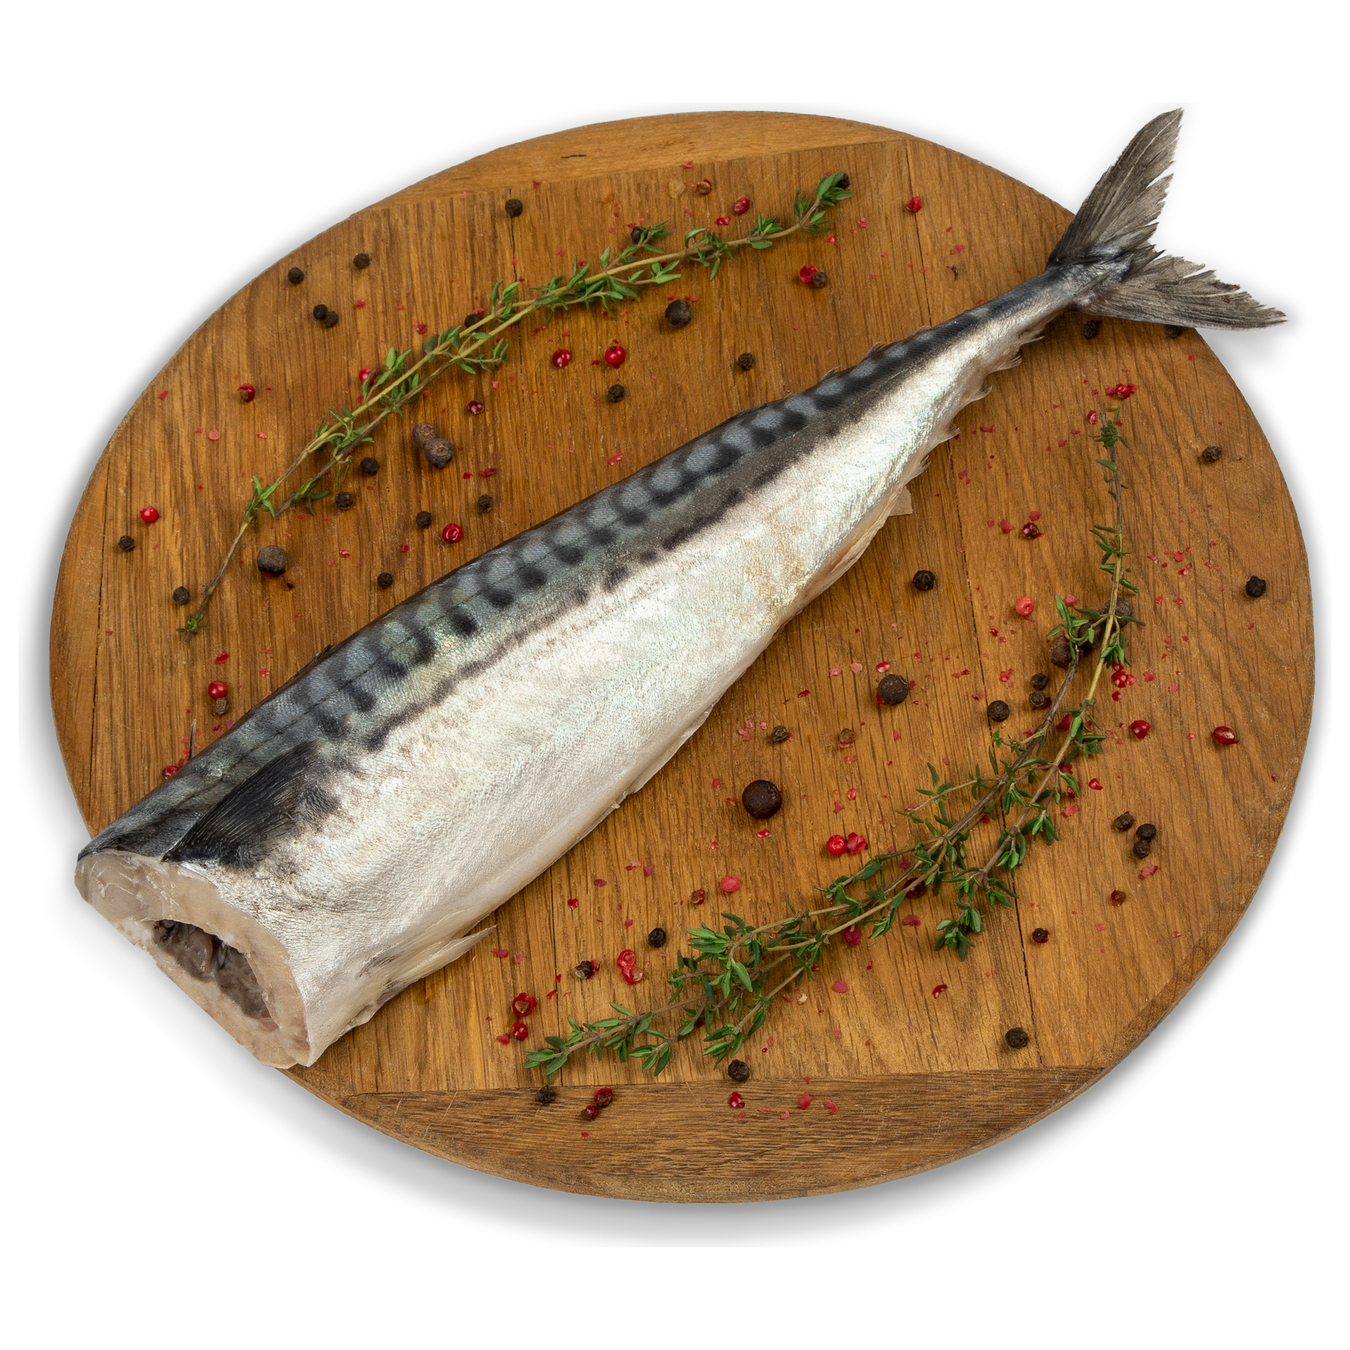 Patrana mackerel without a head, lightly salted by our own production scales